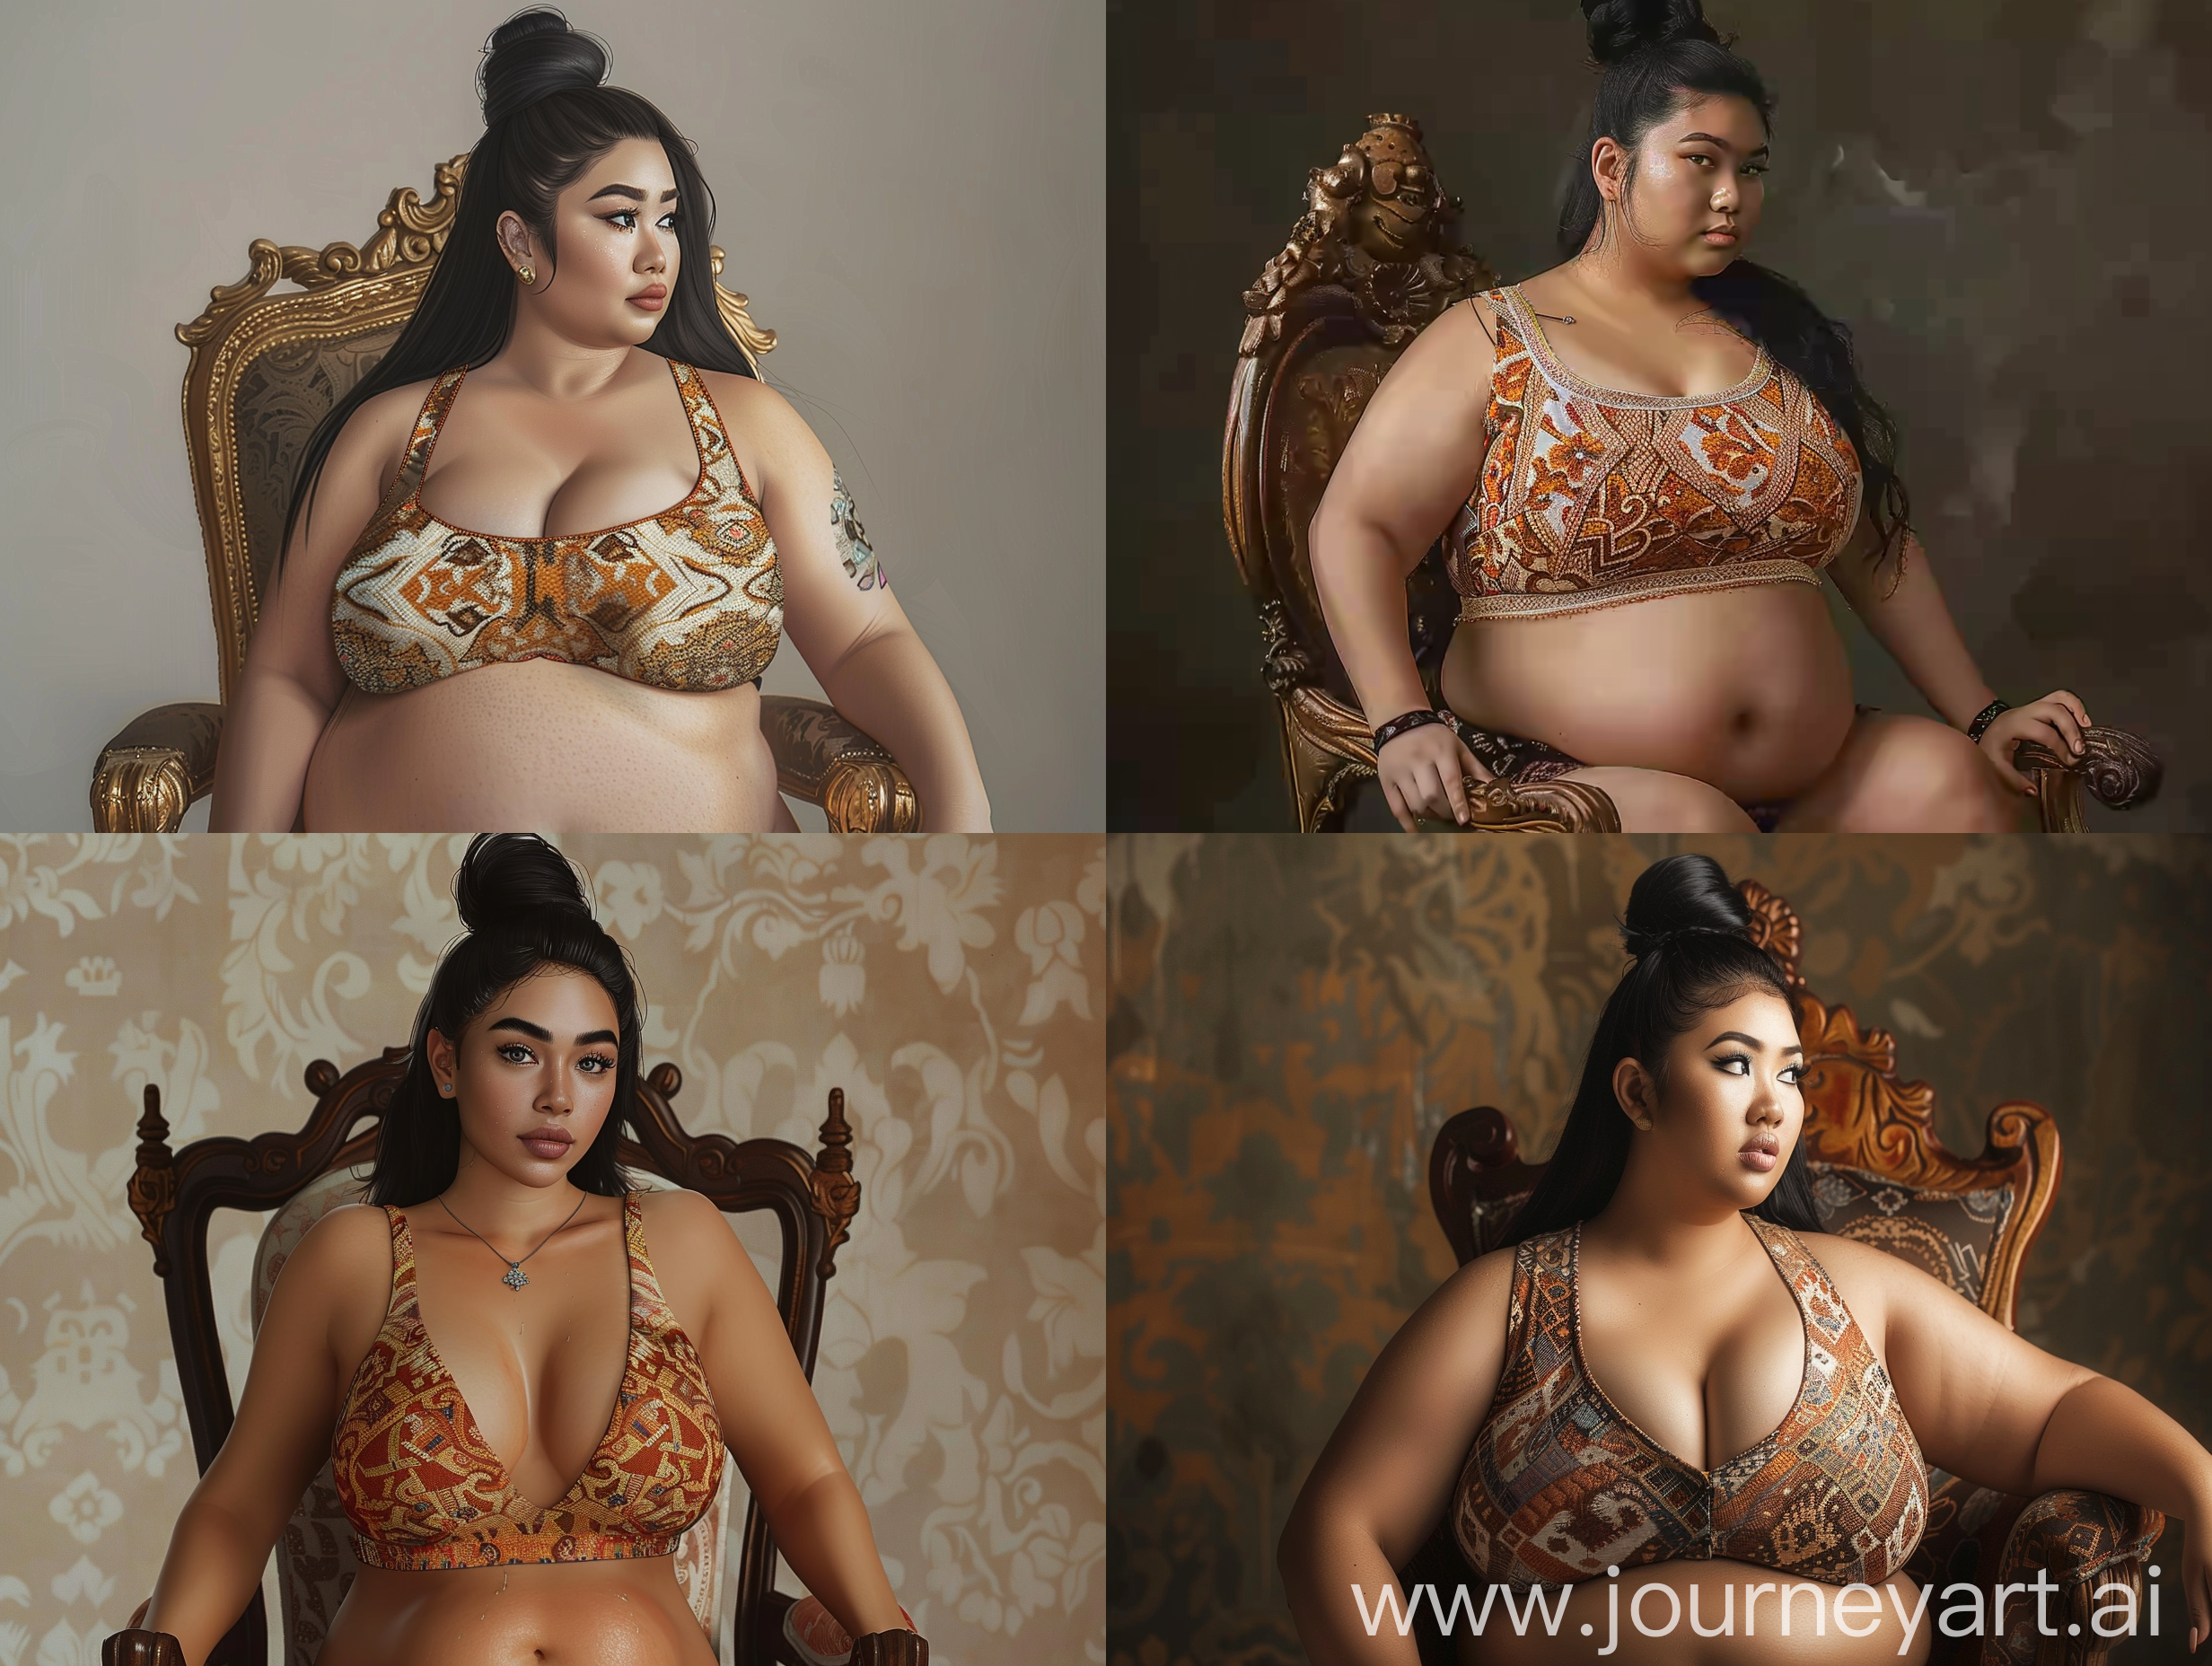 creates a realistic picture of a beautiful Indonesian woman, with a petite, fat body wearing a half-breasted royal style batik patterned tank top, long black hair tied in a bun, sitting on a royal chair